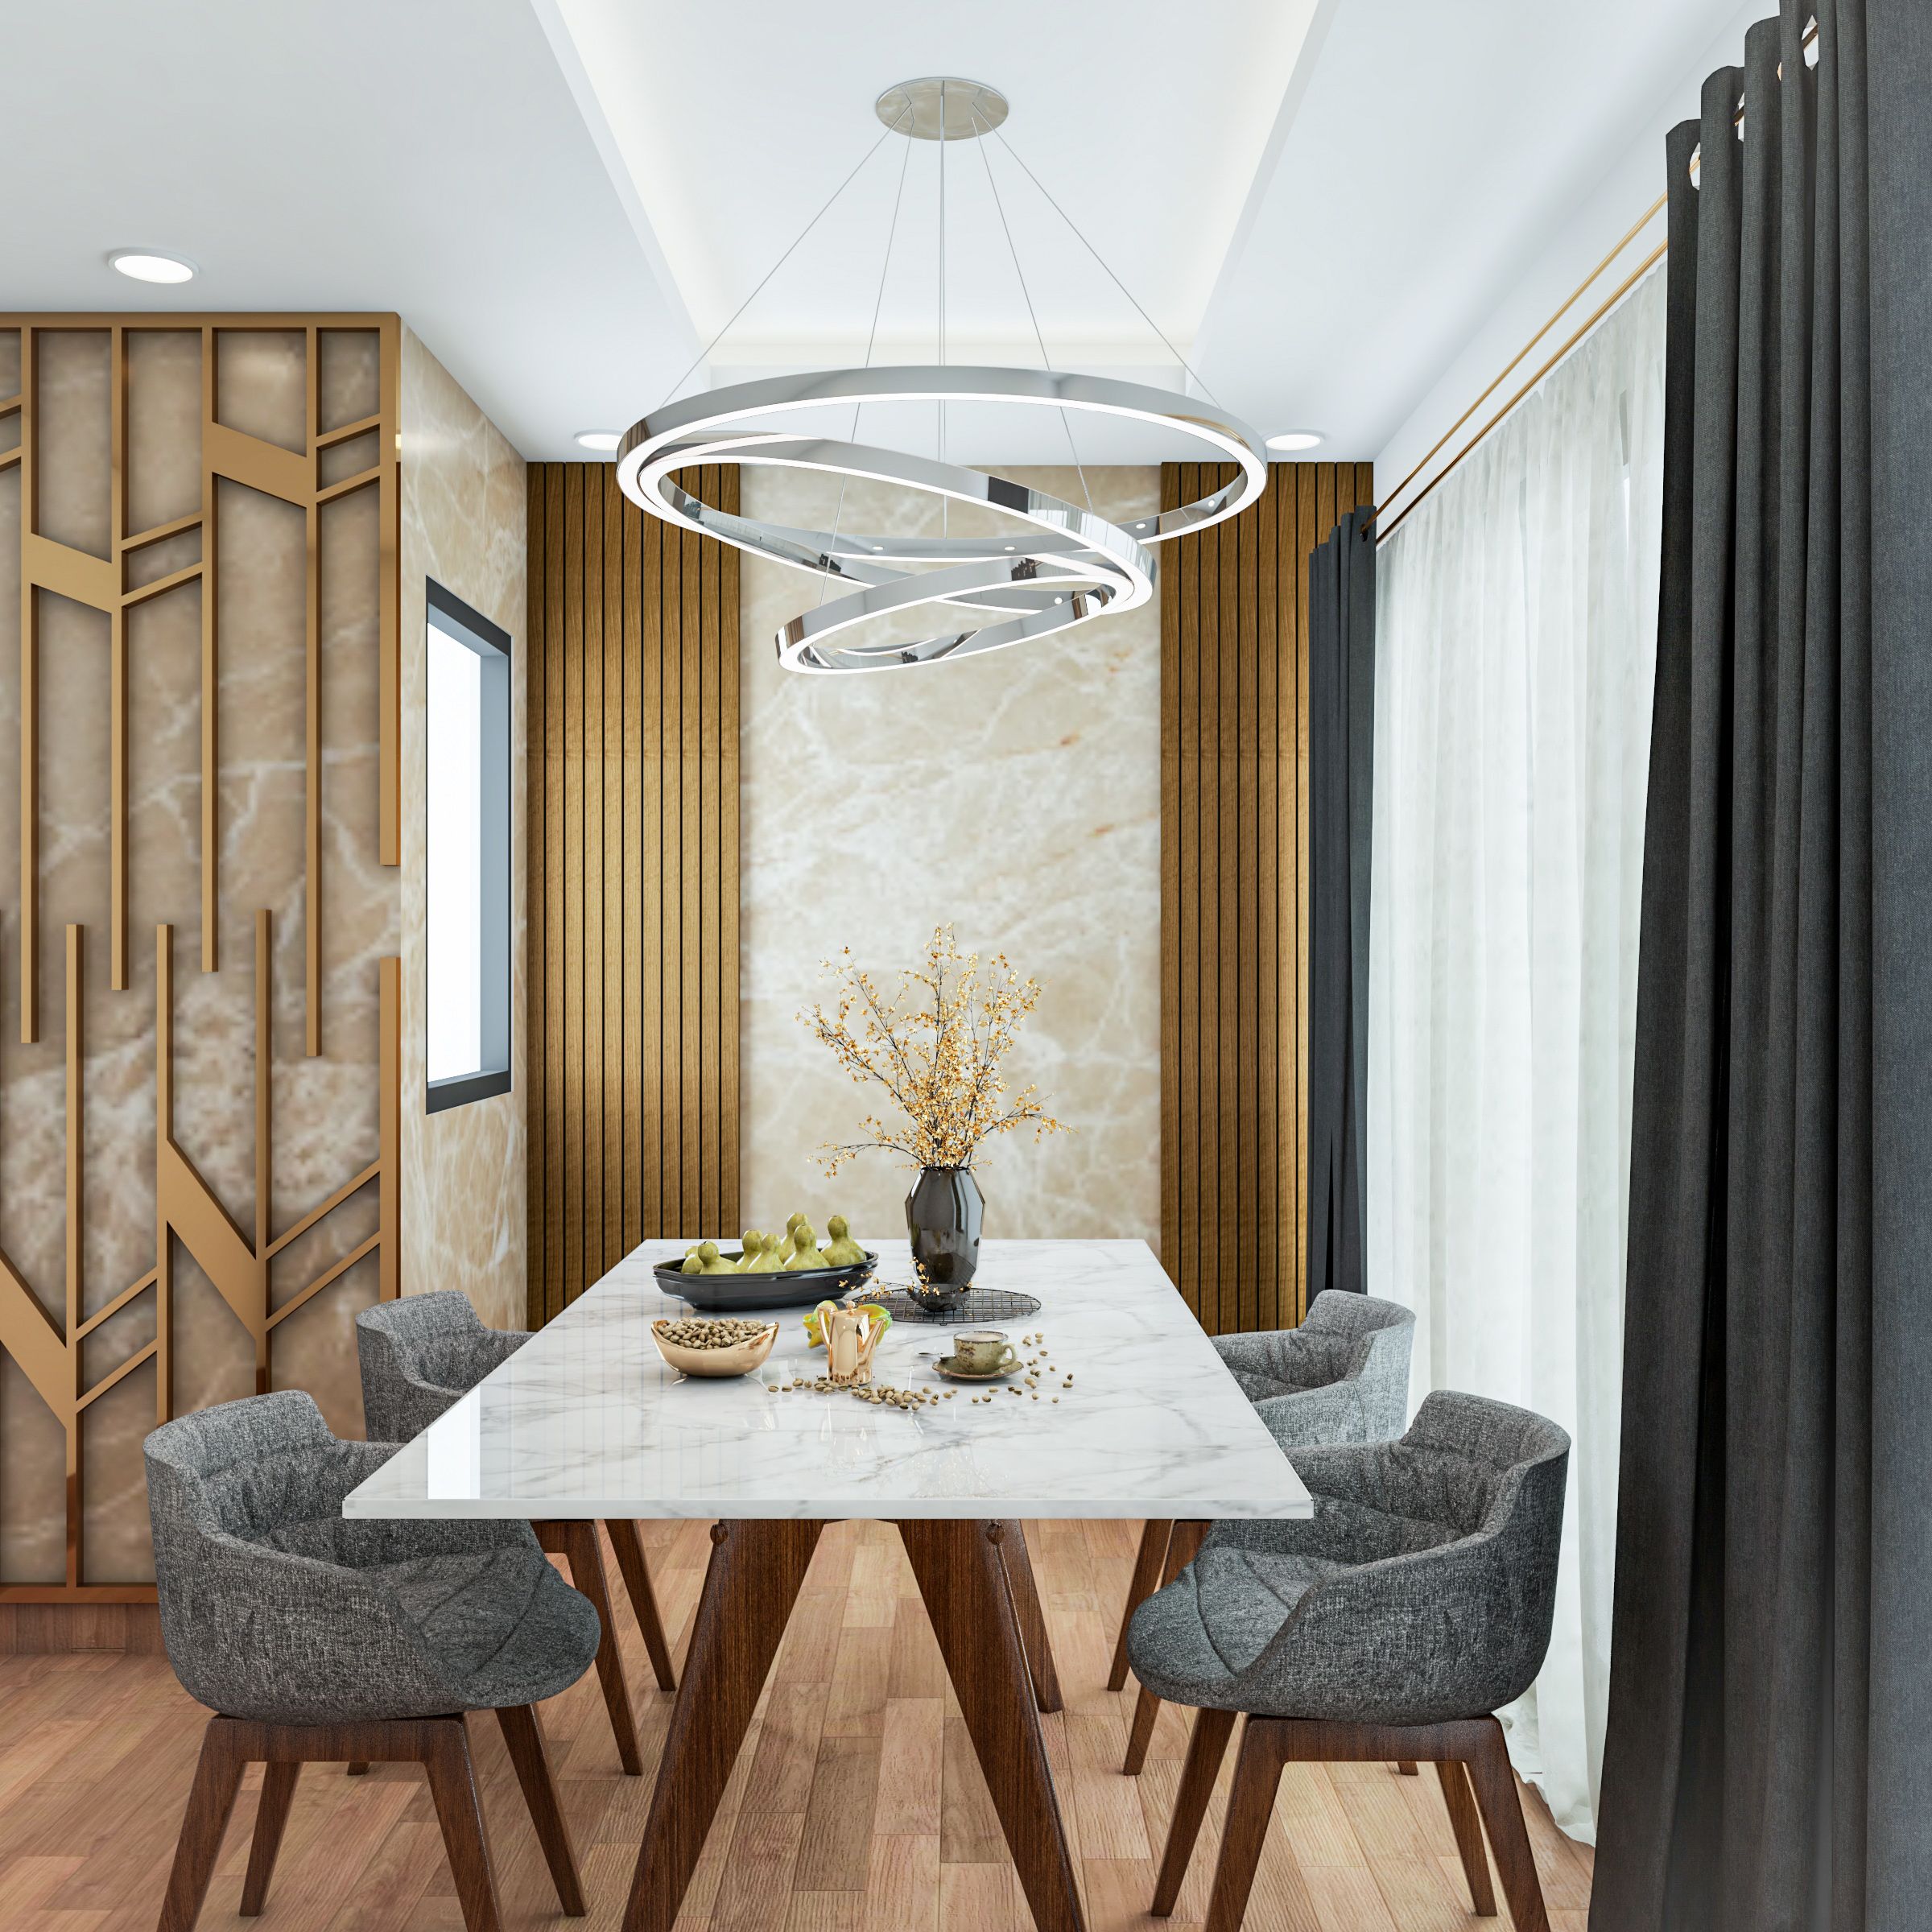 Contemporary Compact Dining Room Design With Chandelier